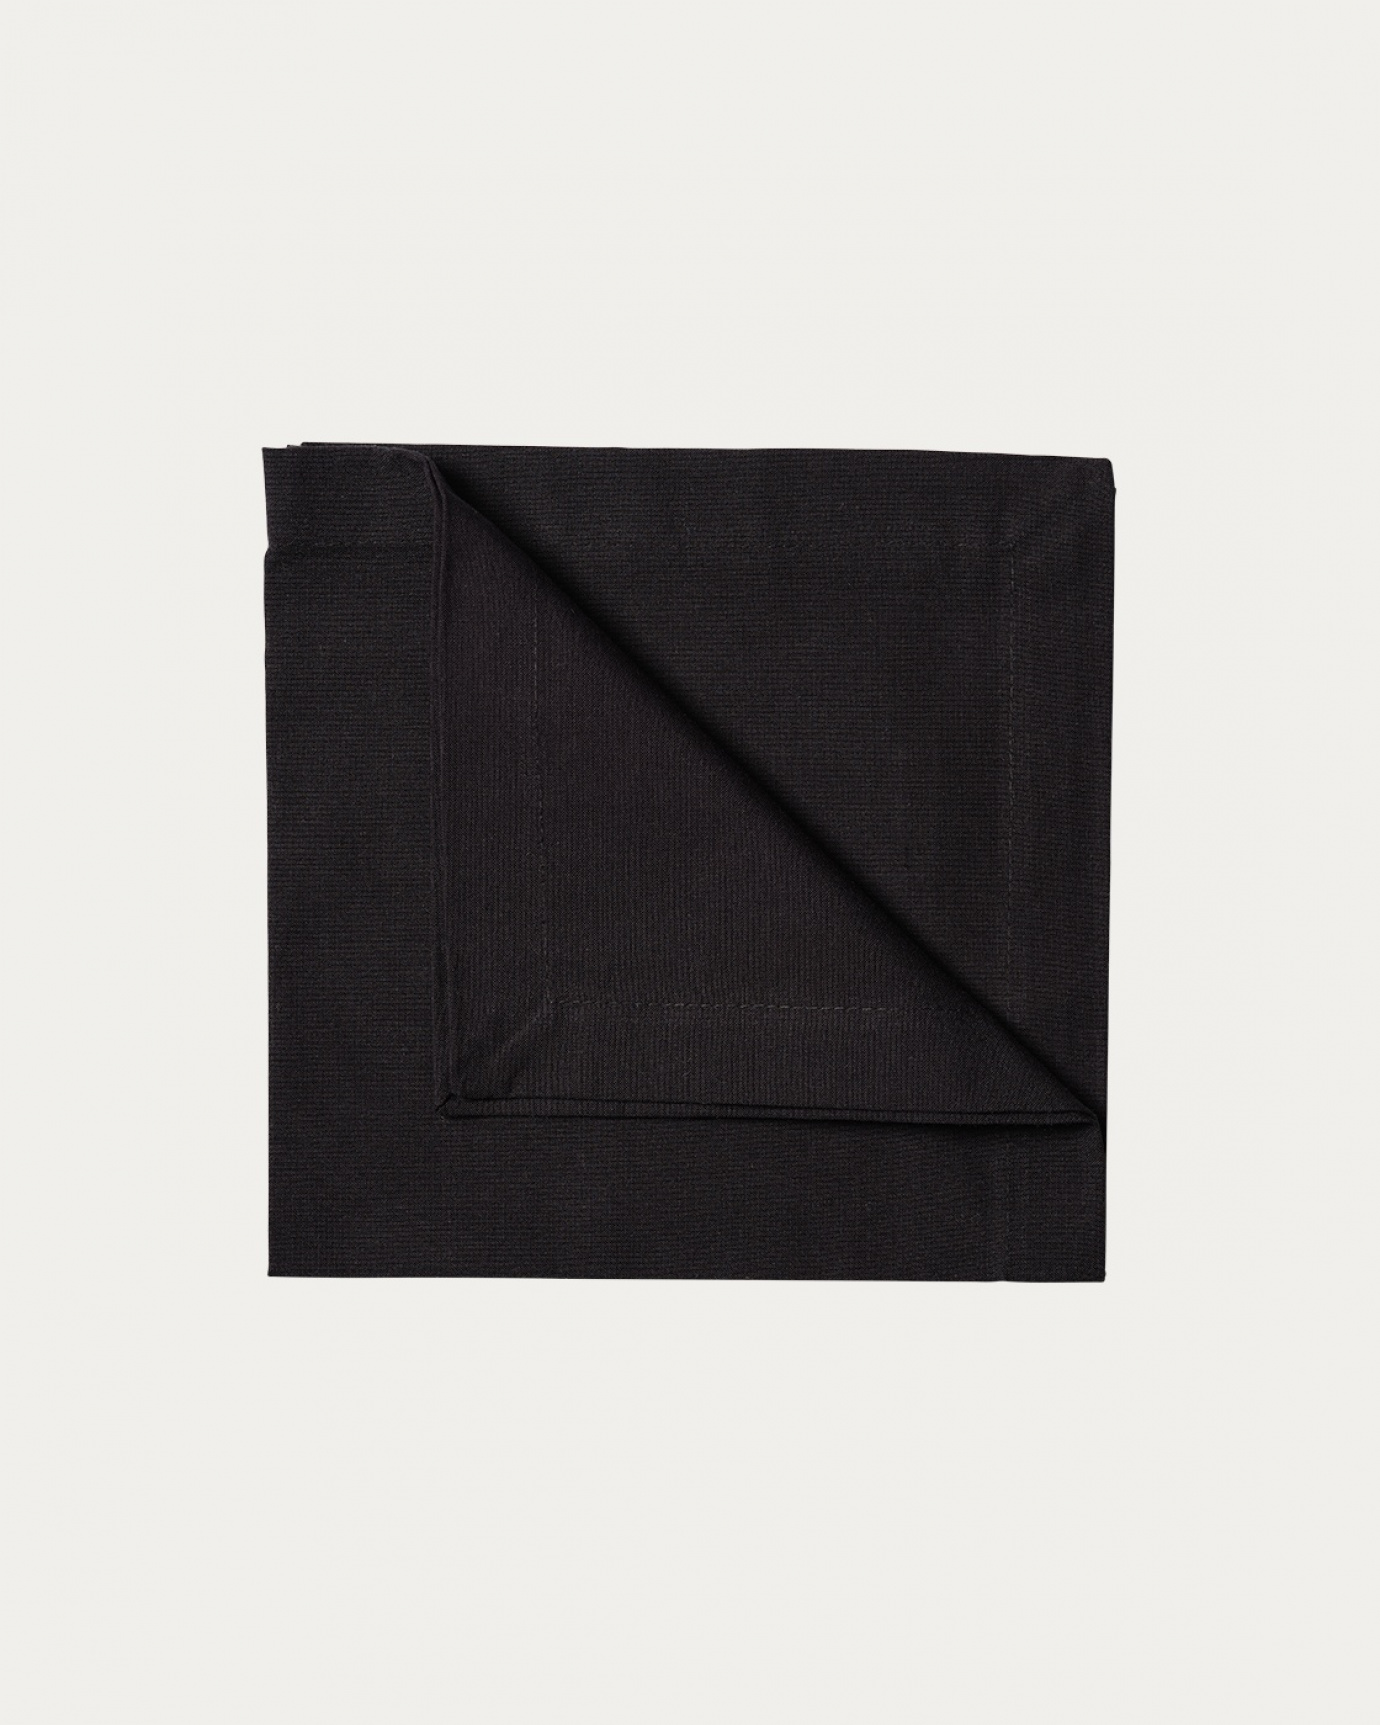 Product image black ROBERT napkin made of soft cotton from LINUM DESIGN. Size 45x45 cm and sold in 4-pack.